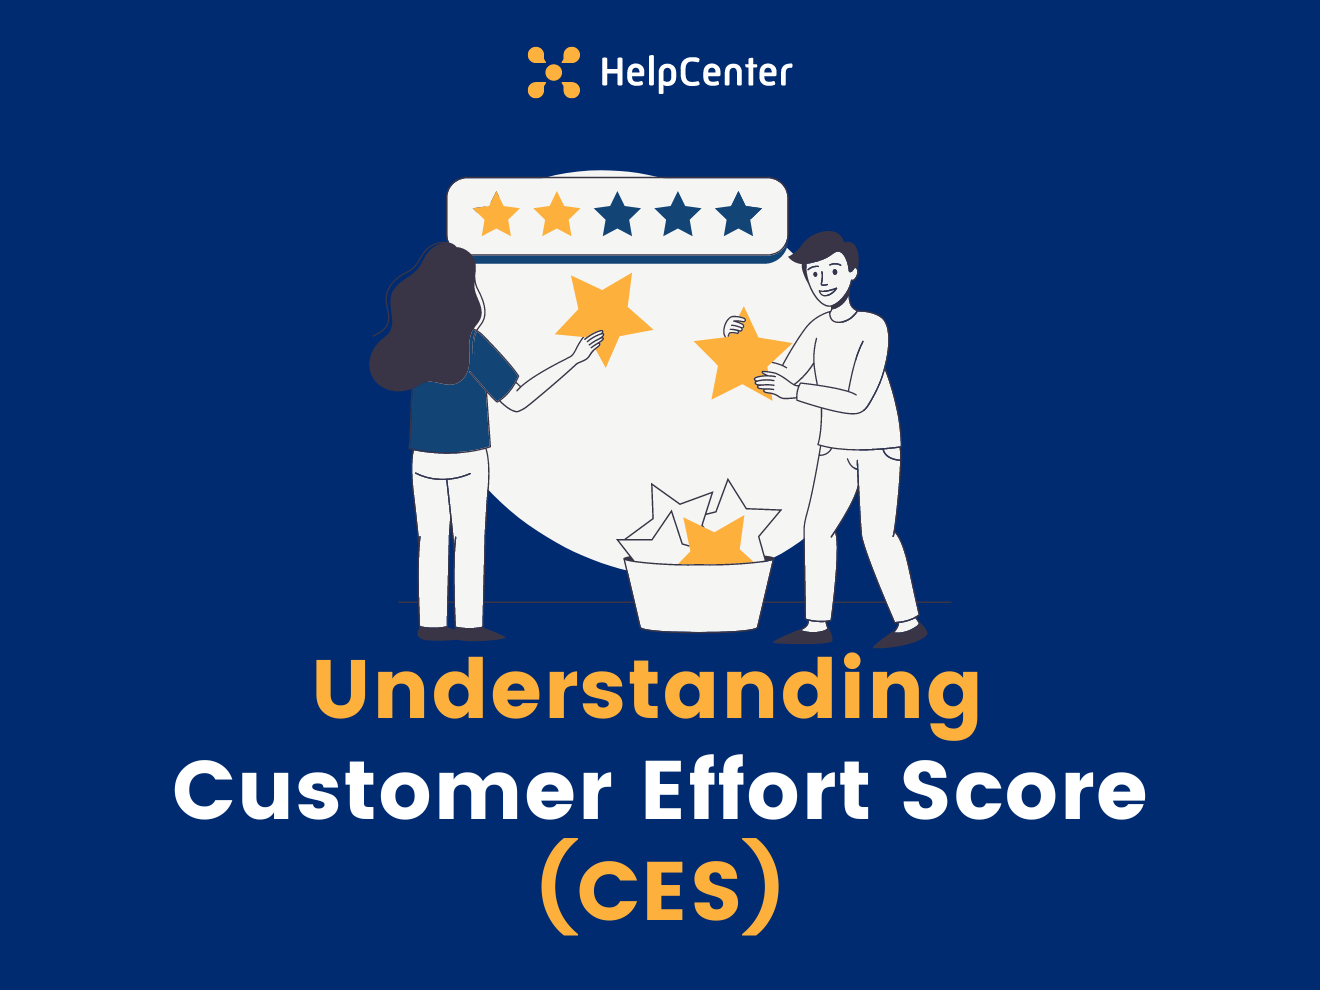 How to Measure Customer Effort Score (CES) and Gain Understanding of Its Significance